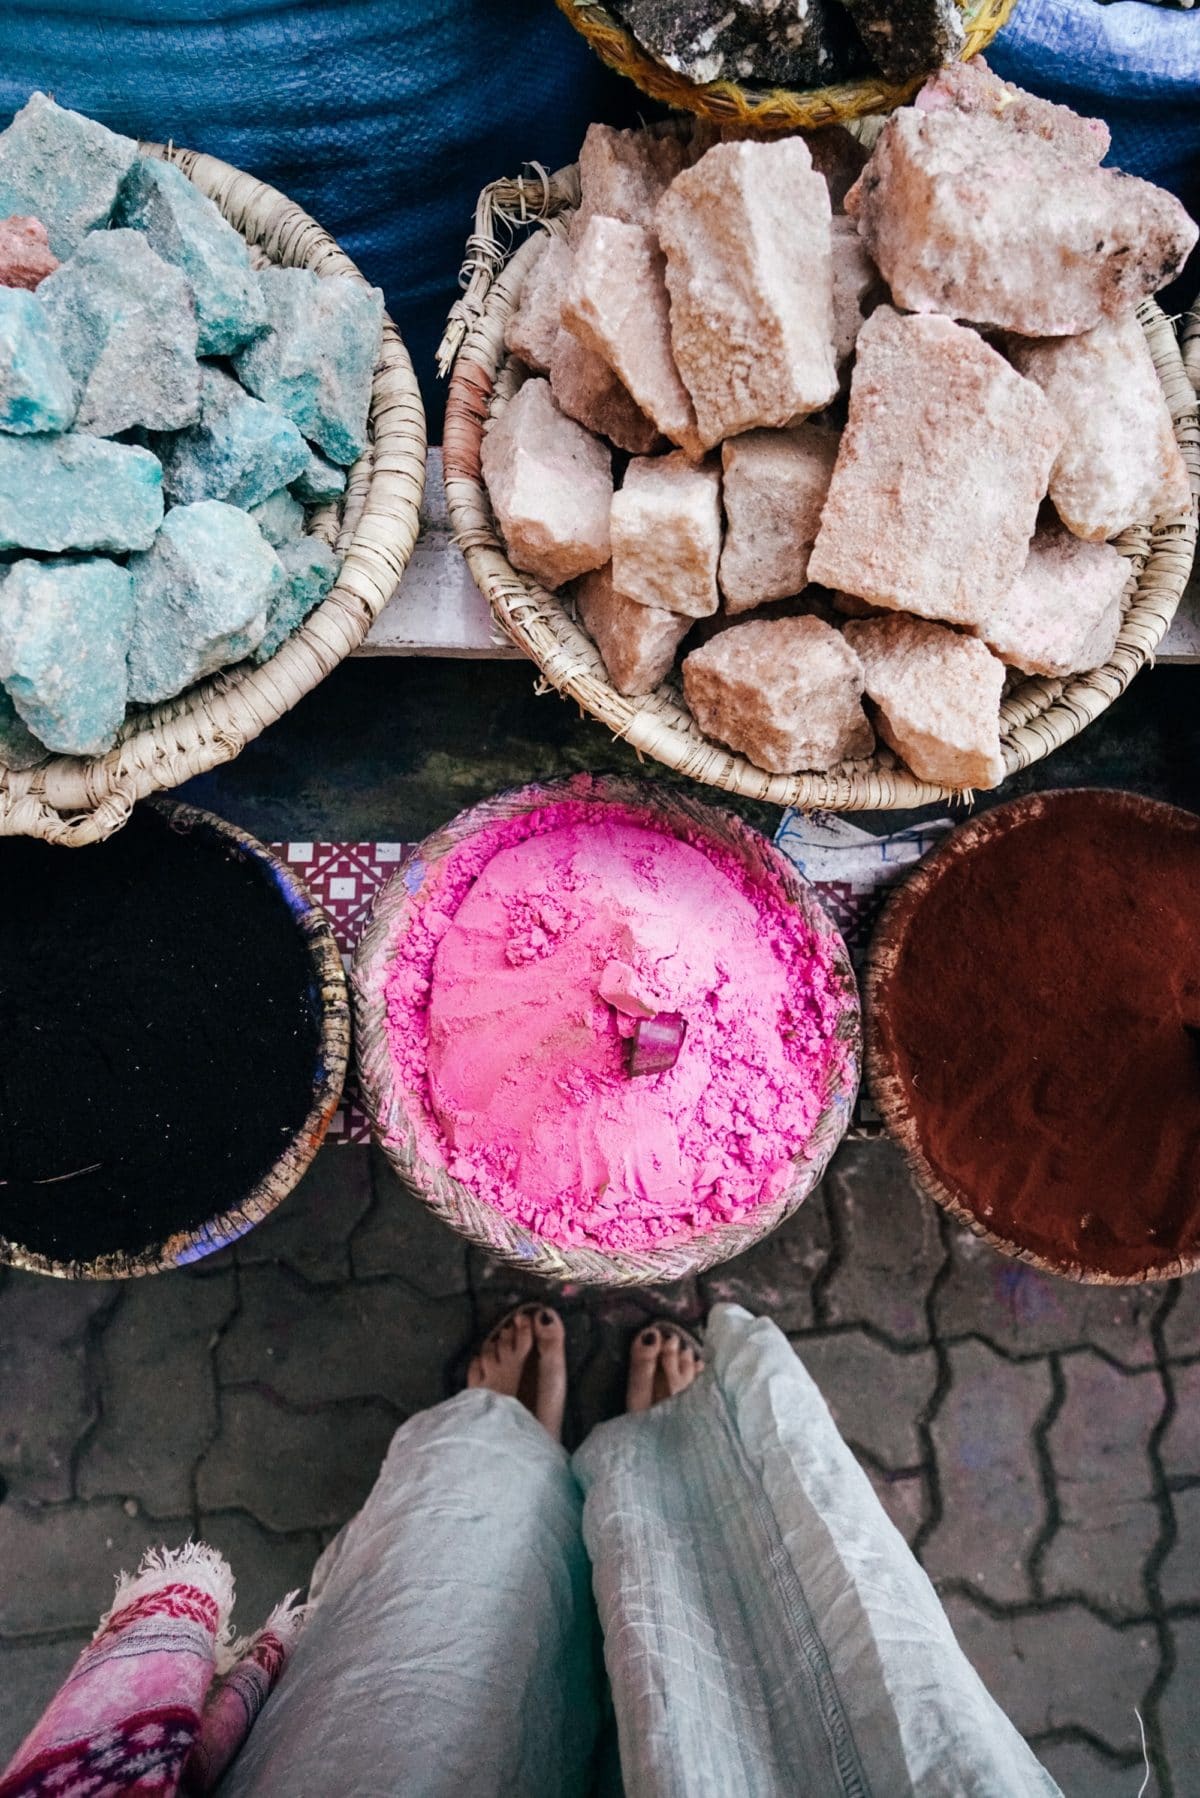 In a Creative Rut? 8 Ways Morocco Will Re-Inspire You